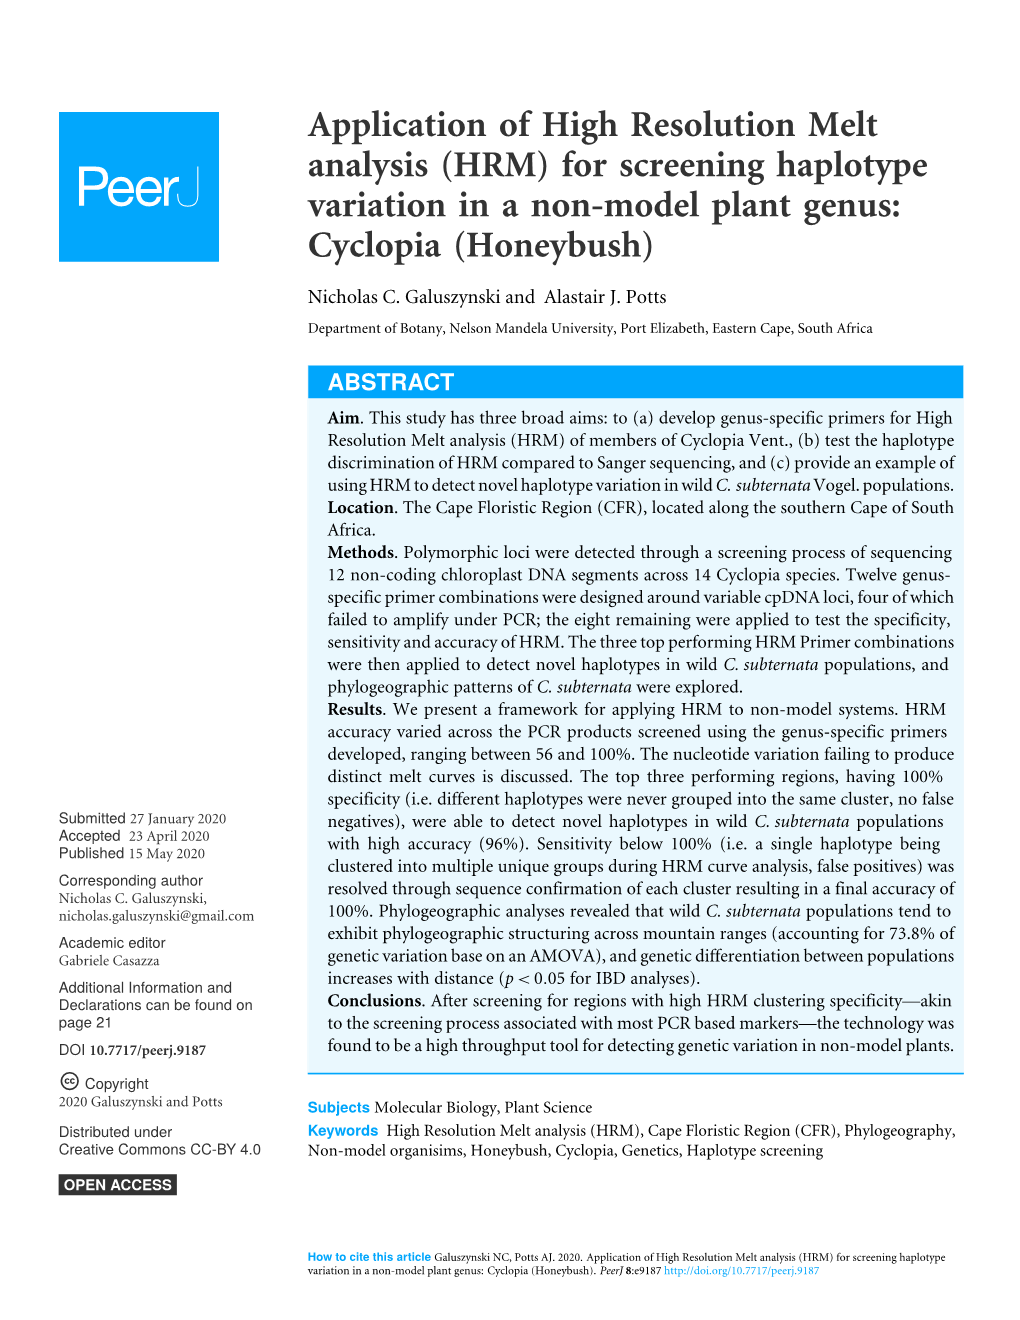 Application of High Resolution Melt Analysis (HRM) for Screening Haplotype Variation in a Non-Model Plant Genus: Cyclopia (Honeybush)